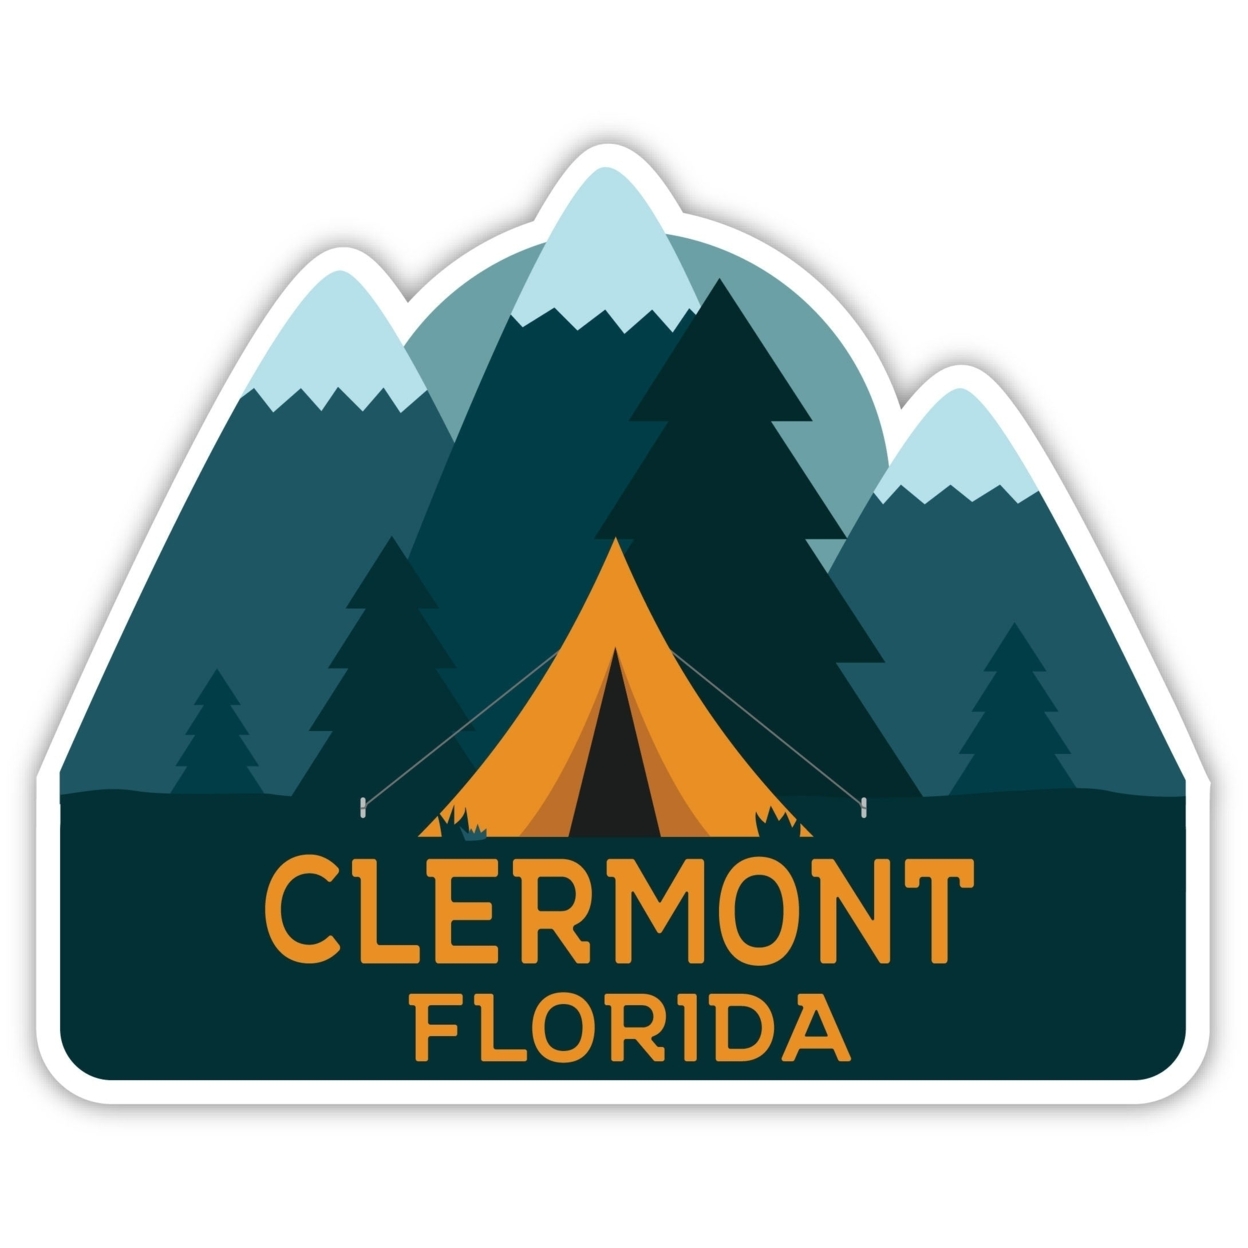 Clermont Florida Souvenir Decorative Stickers (Choose Theme And Size) - 4-Pack, 2-Inch, Tent